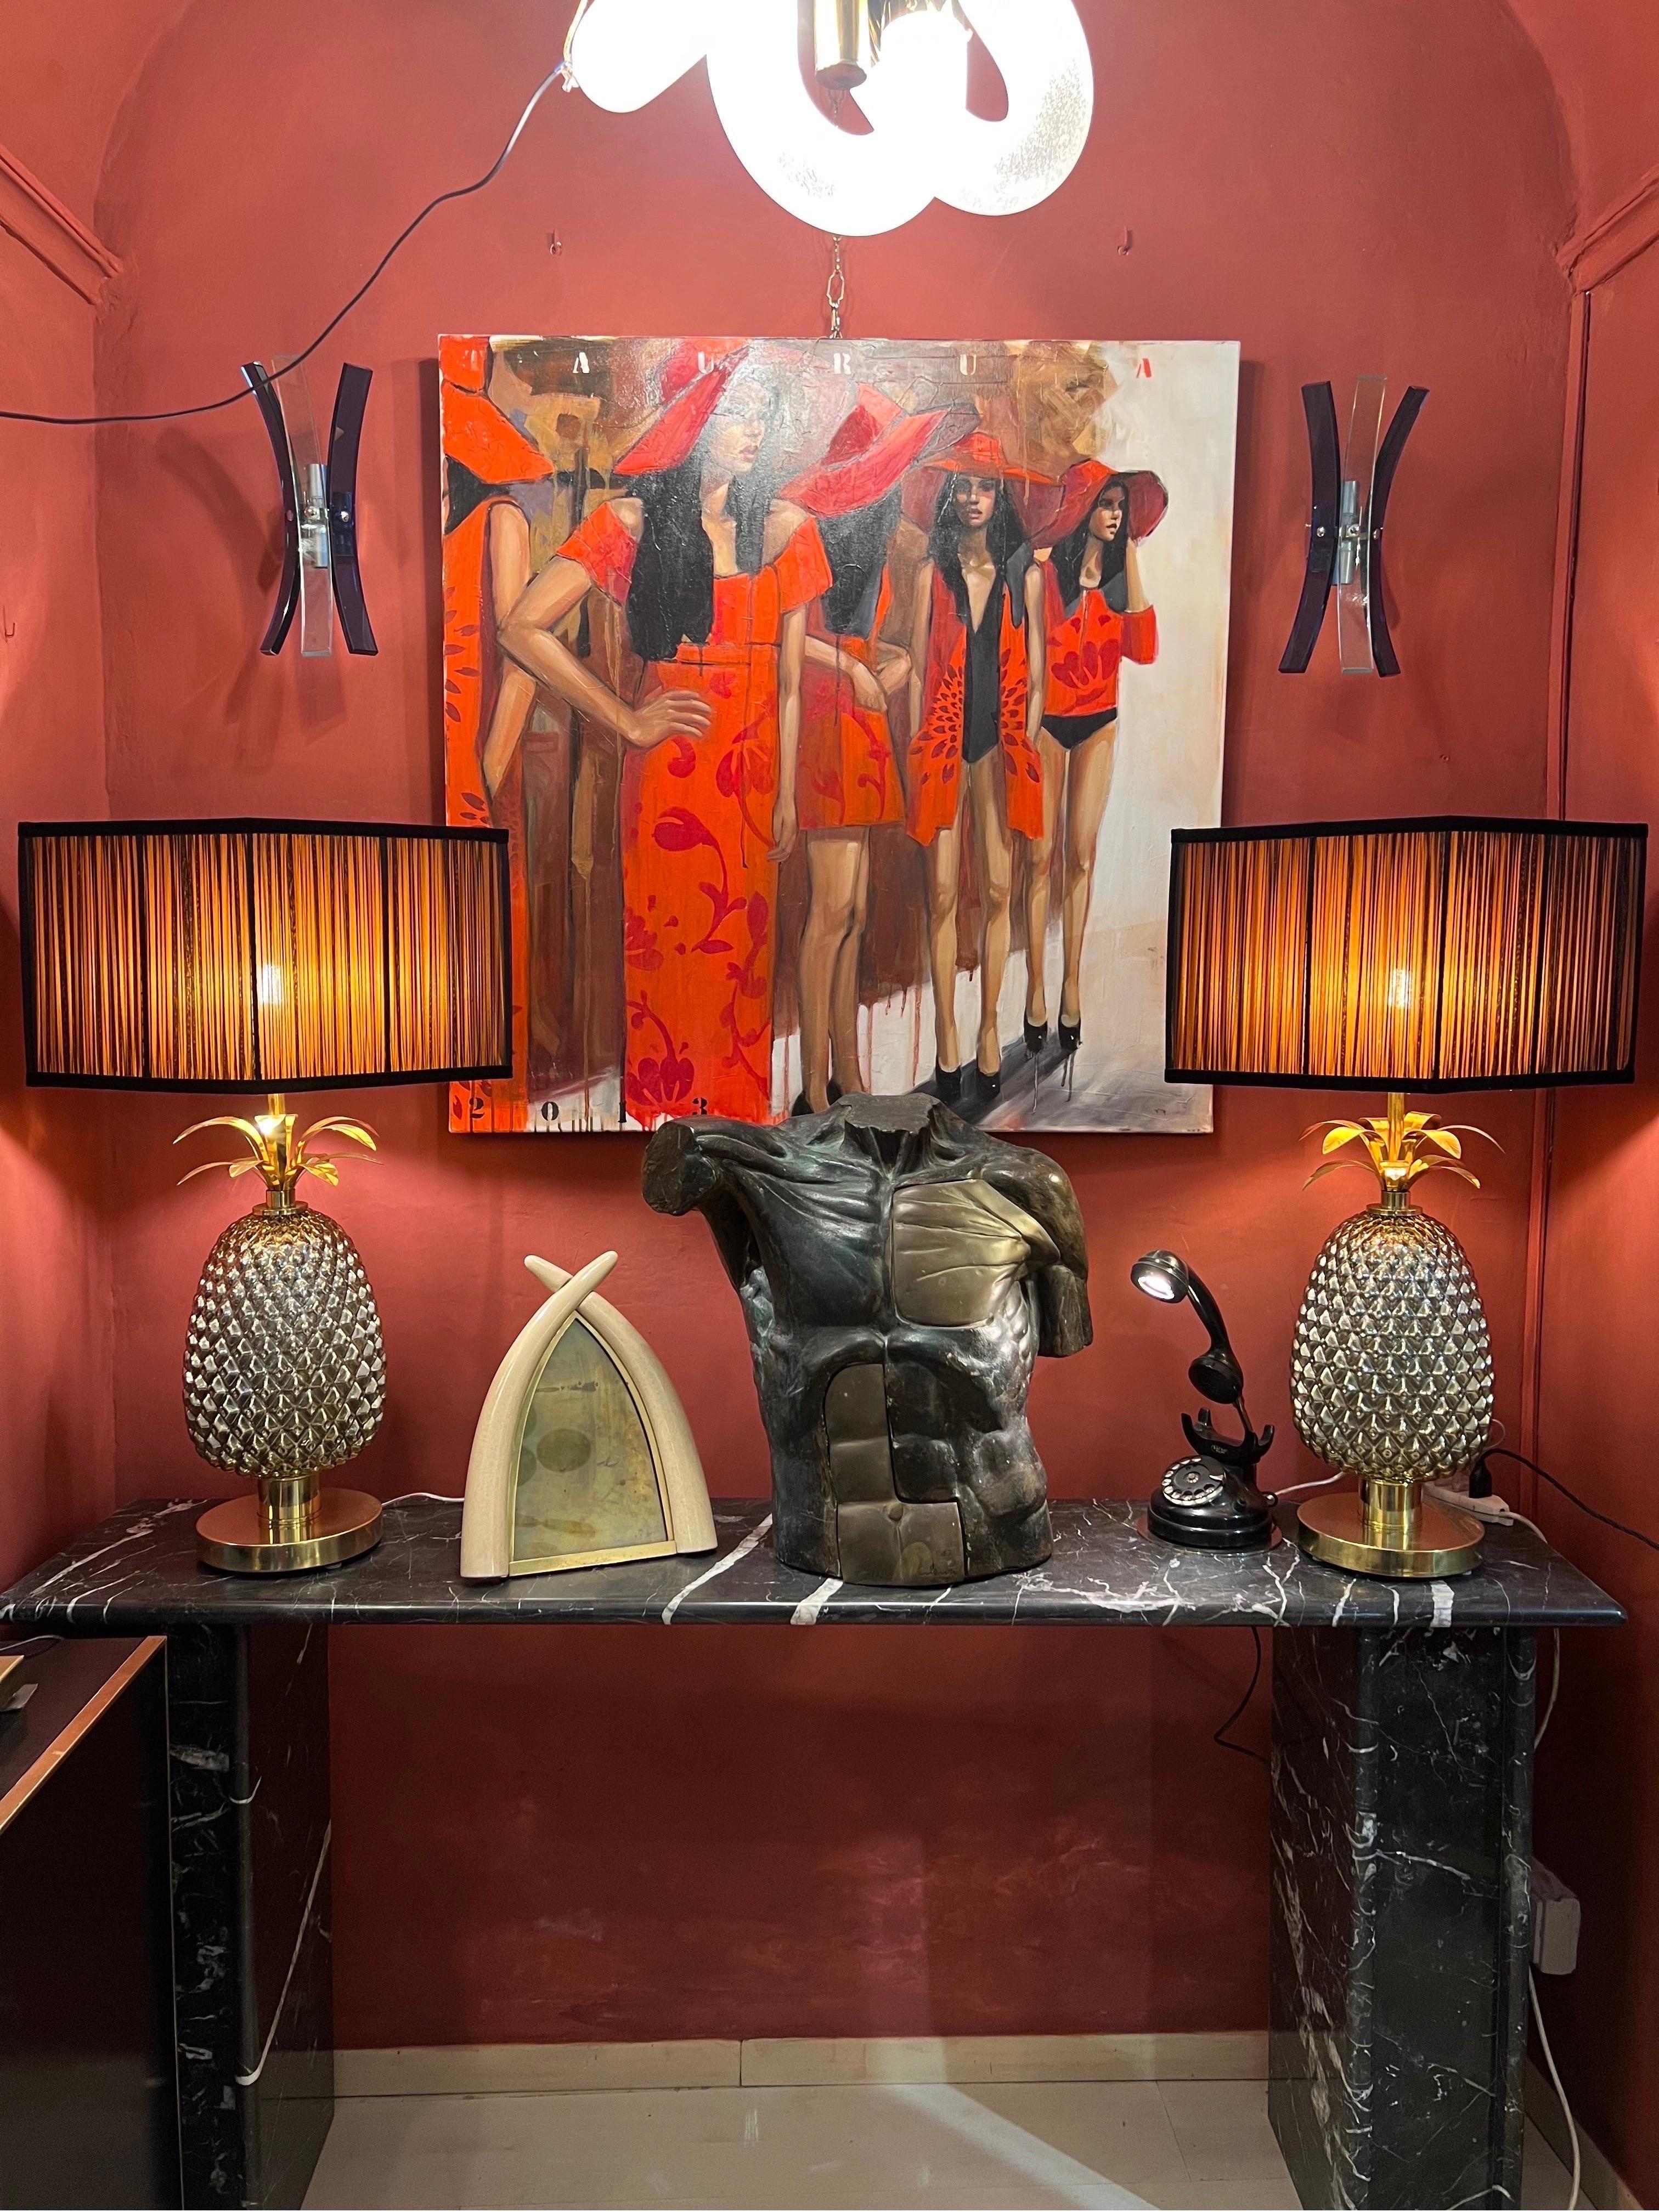 Pair of Gold Murano glass table lamps pineapple shaped with our lampshades and round brass base and details.
The double color-lampshades are handmade in our internal laboratory using ruffled double-color silk chiffon black on the outside and gold